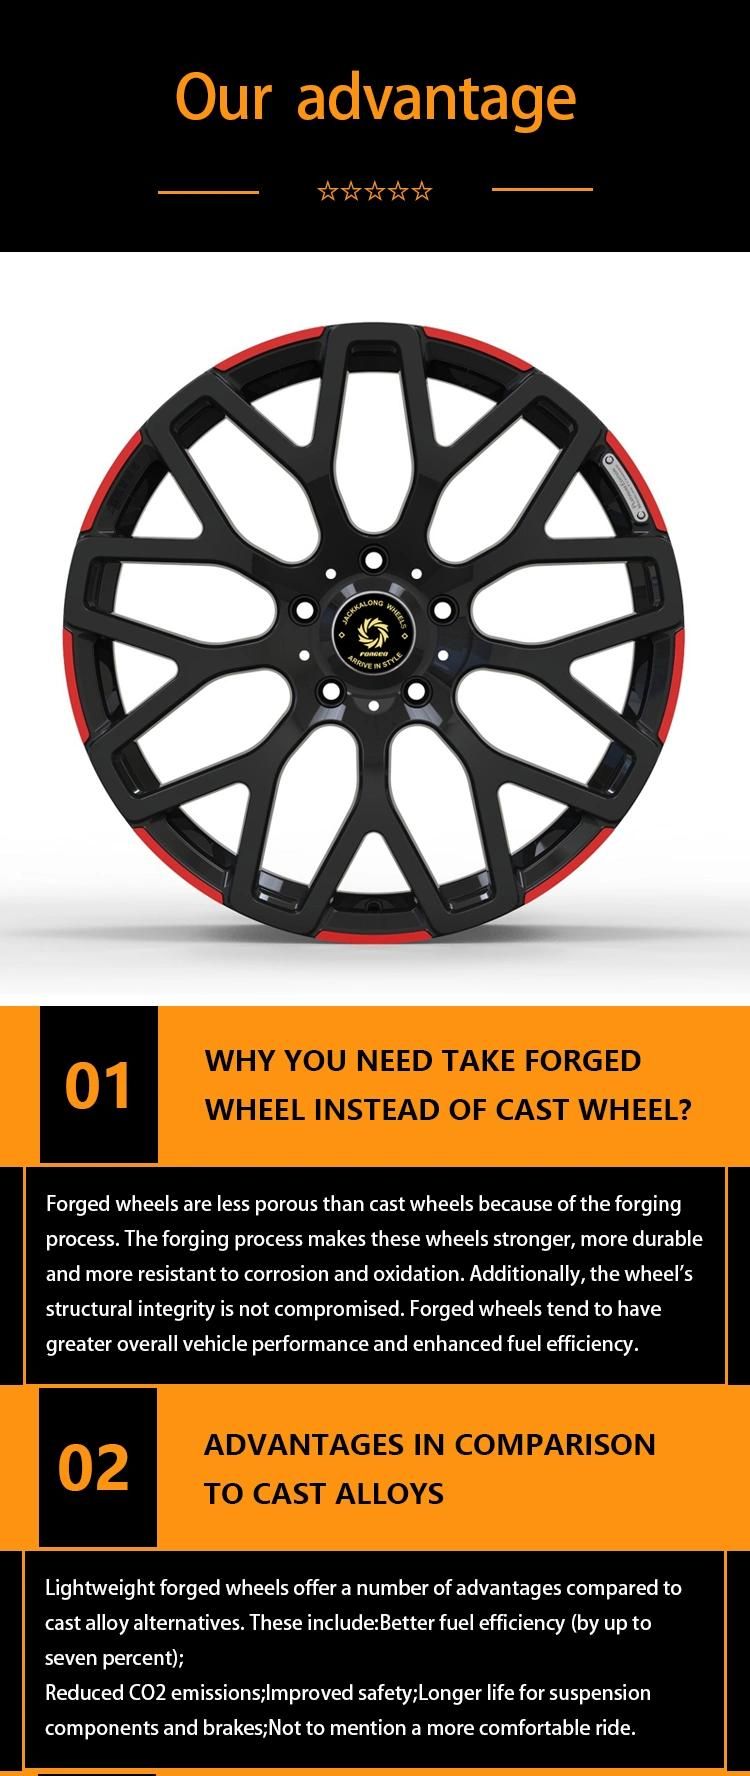 1 Piece Forged T6061 Alloy Rims Sport Aluminum Wheels for Customized Mag Rims Alloy Wheels T6061 Material with Matt Black and Red Line and Milling Engraving